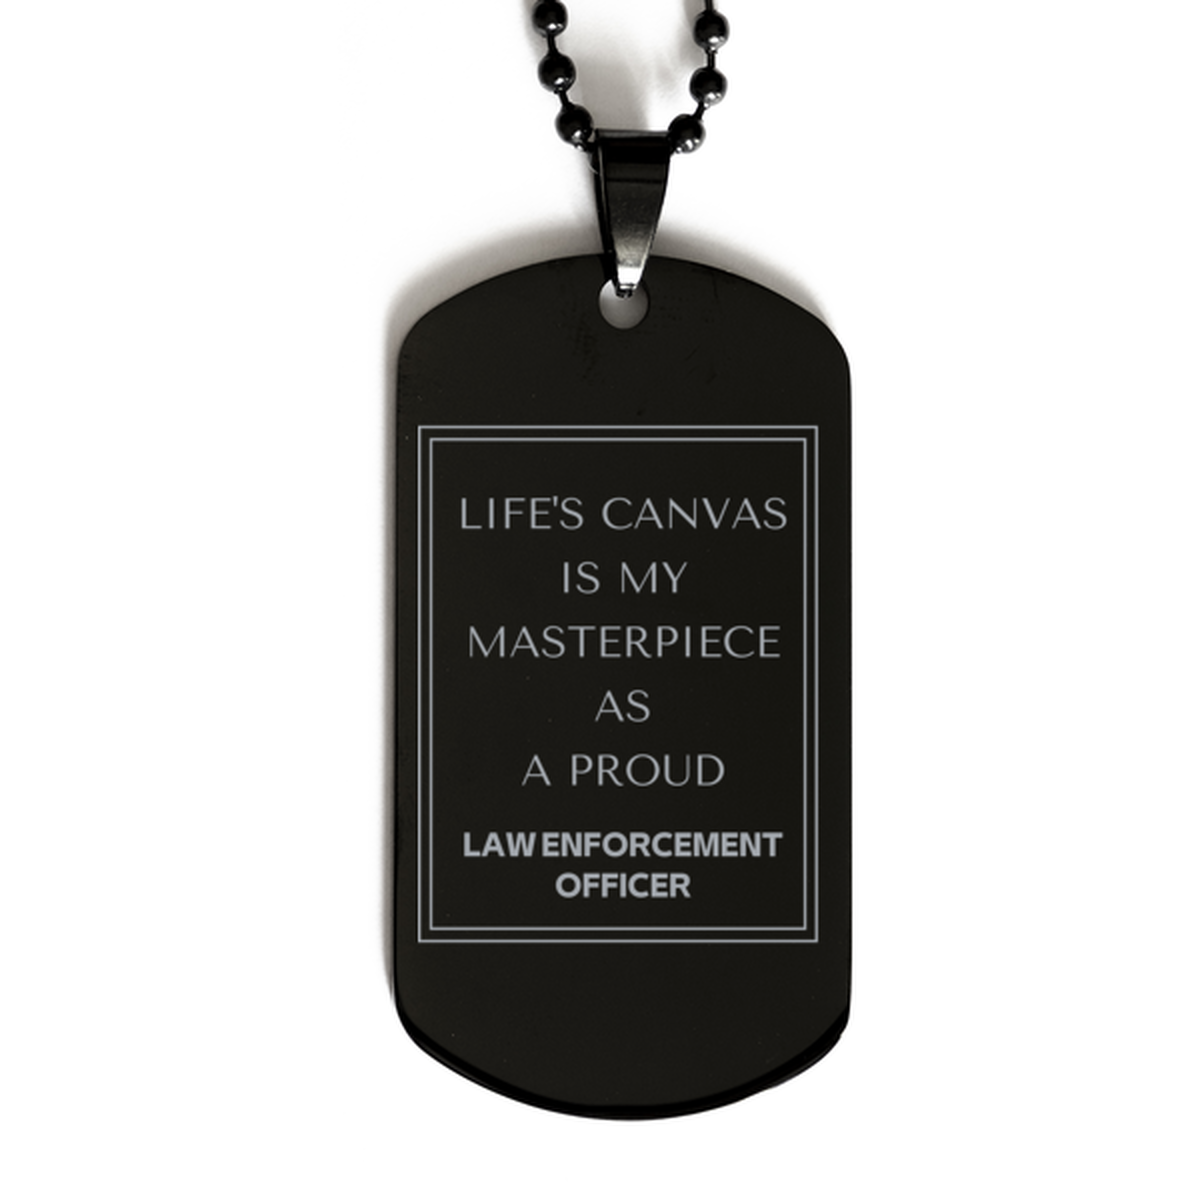 Proud Law Enforcement Officer Gifts, Life's canvas is my masterpiece, Epic Birthday Christmas Unique Black Dog Tag For Law Enforcement Officer, Coworkers, Men, Women, Friends